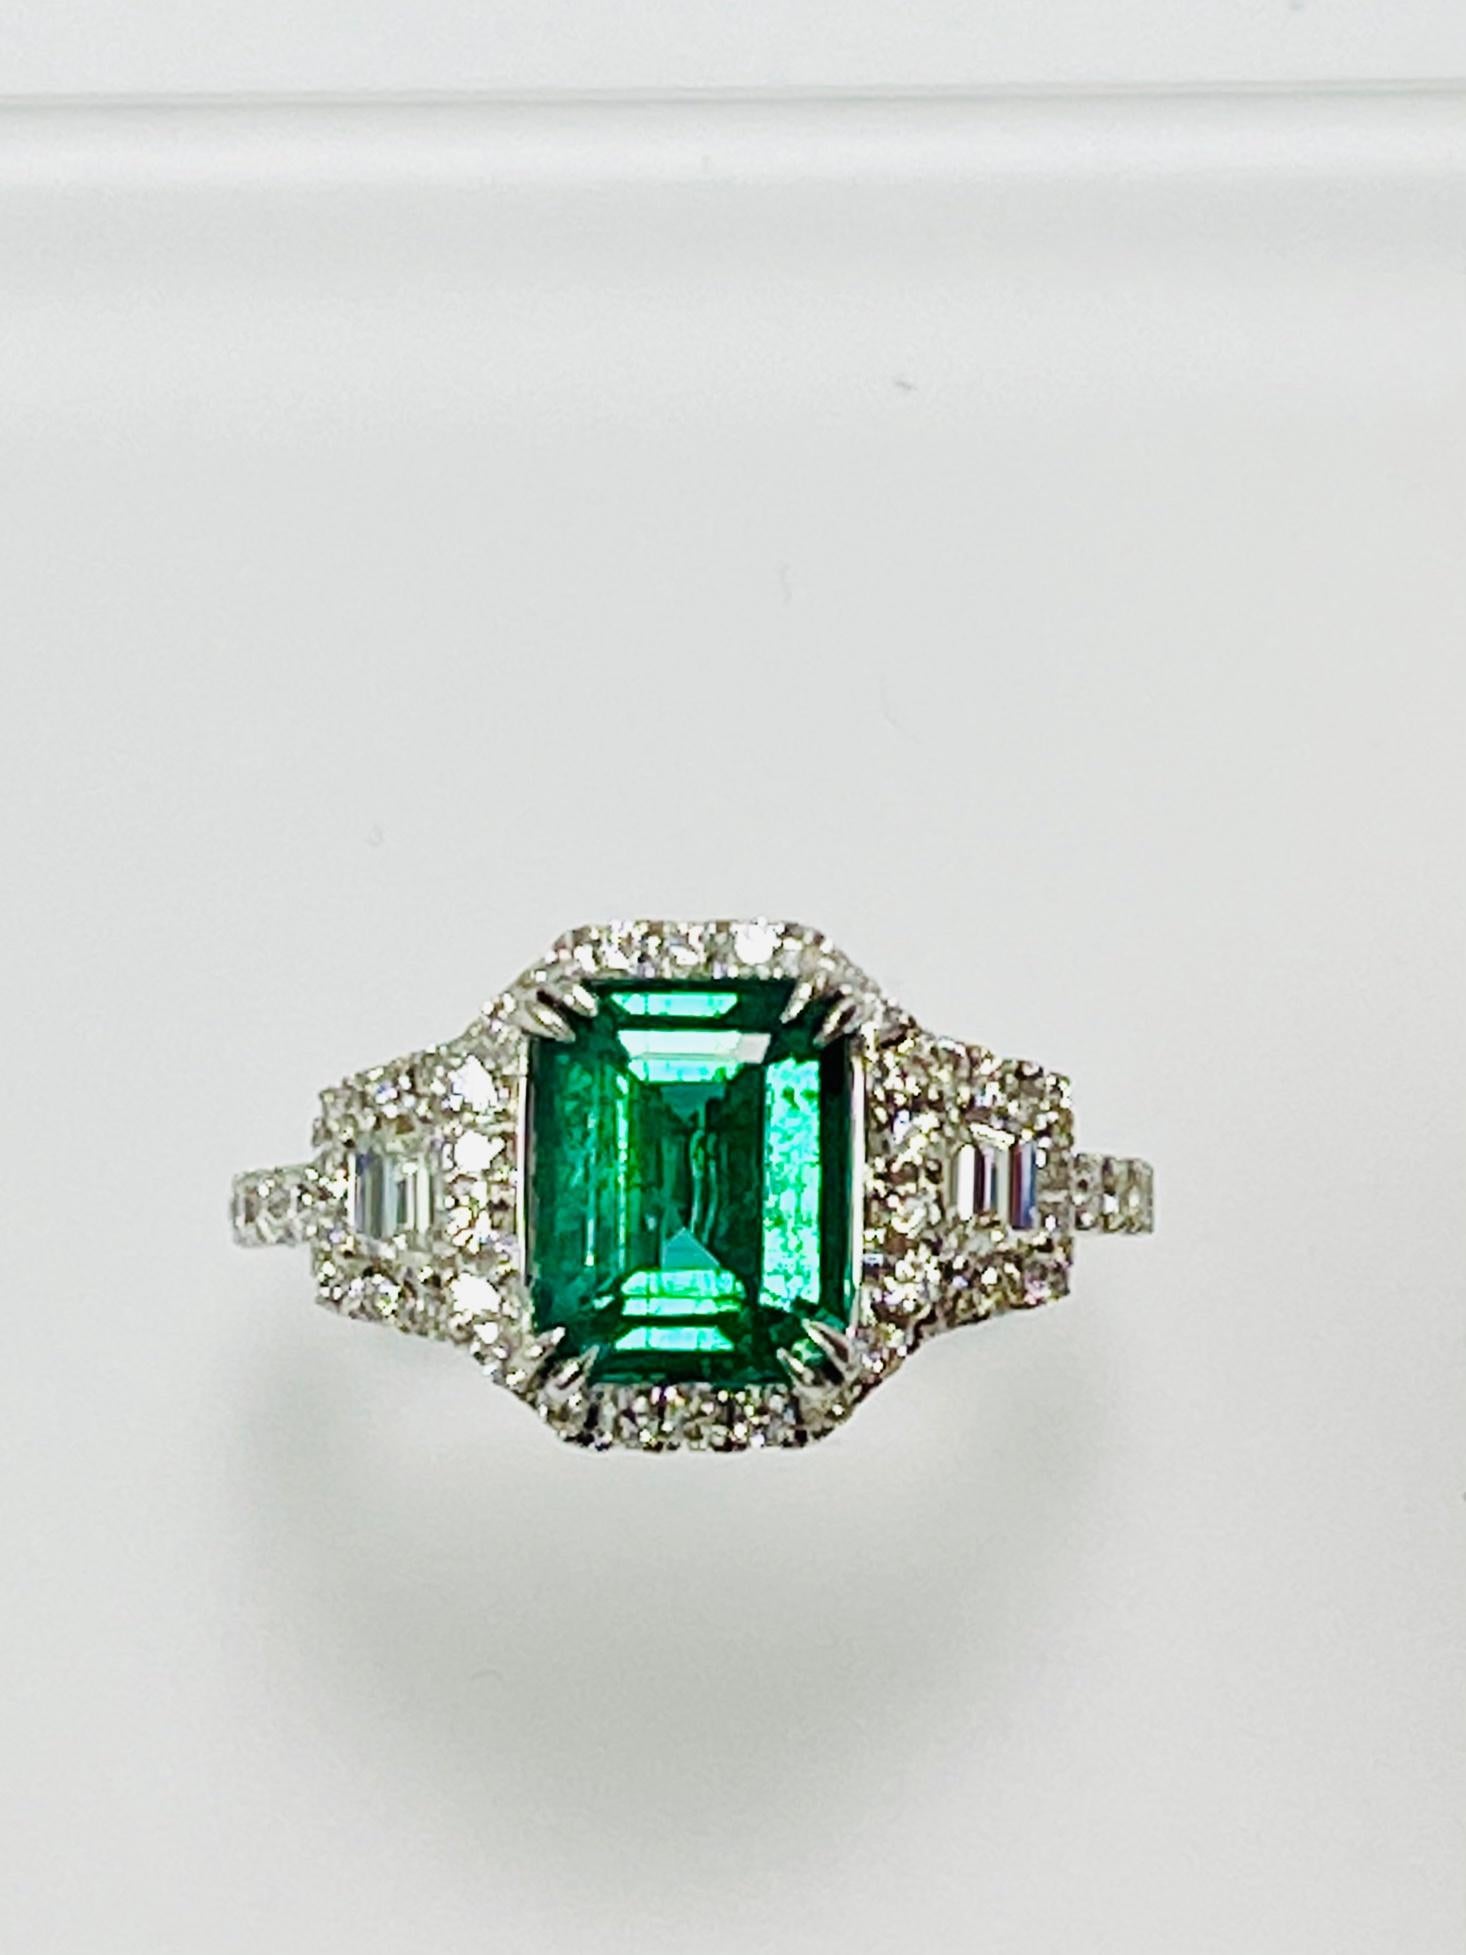 2.16 Carat Emerald cut Zambian emerald set in 18k white gold ring with 0.88 ct round diamonds around it and half way on the shank, with trapezoid diamonds .